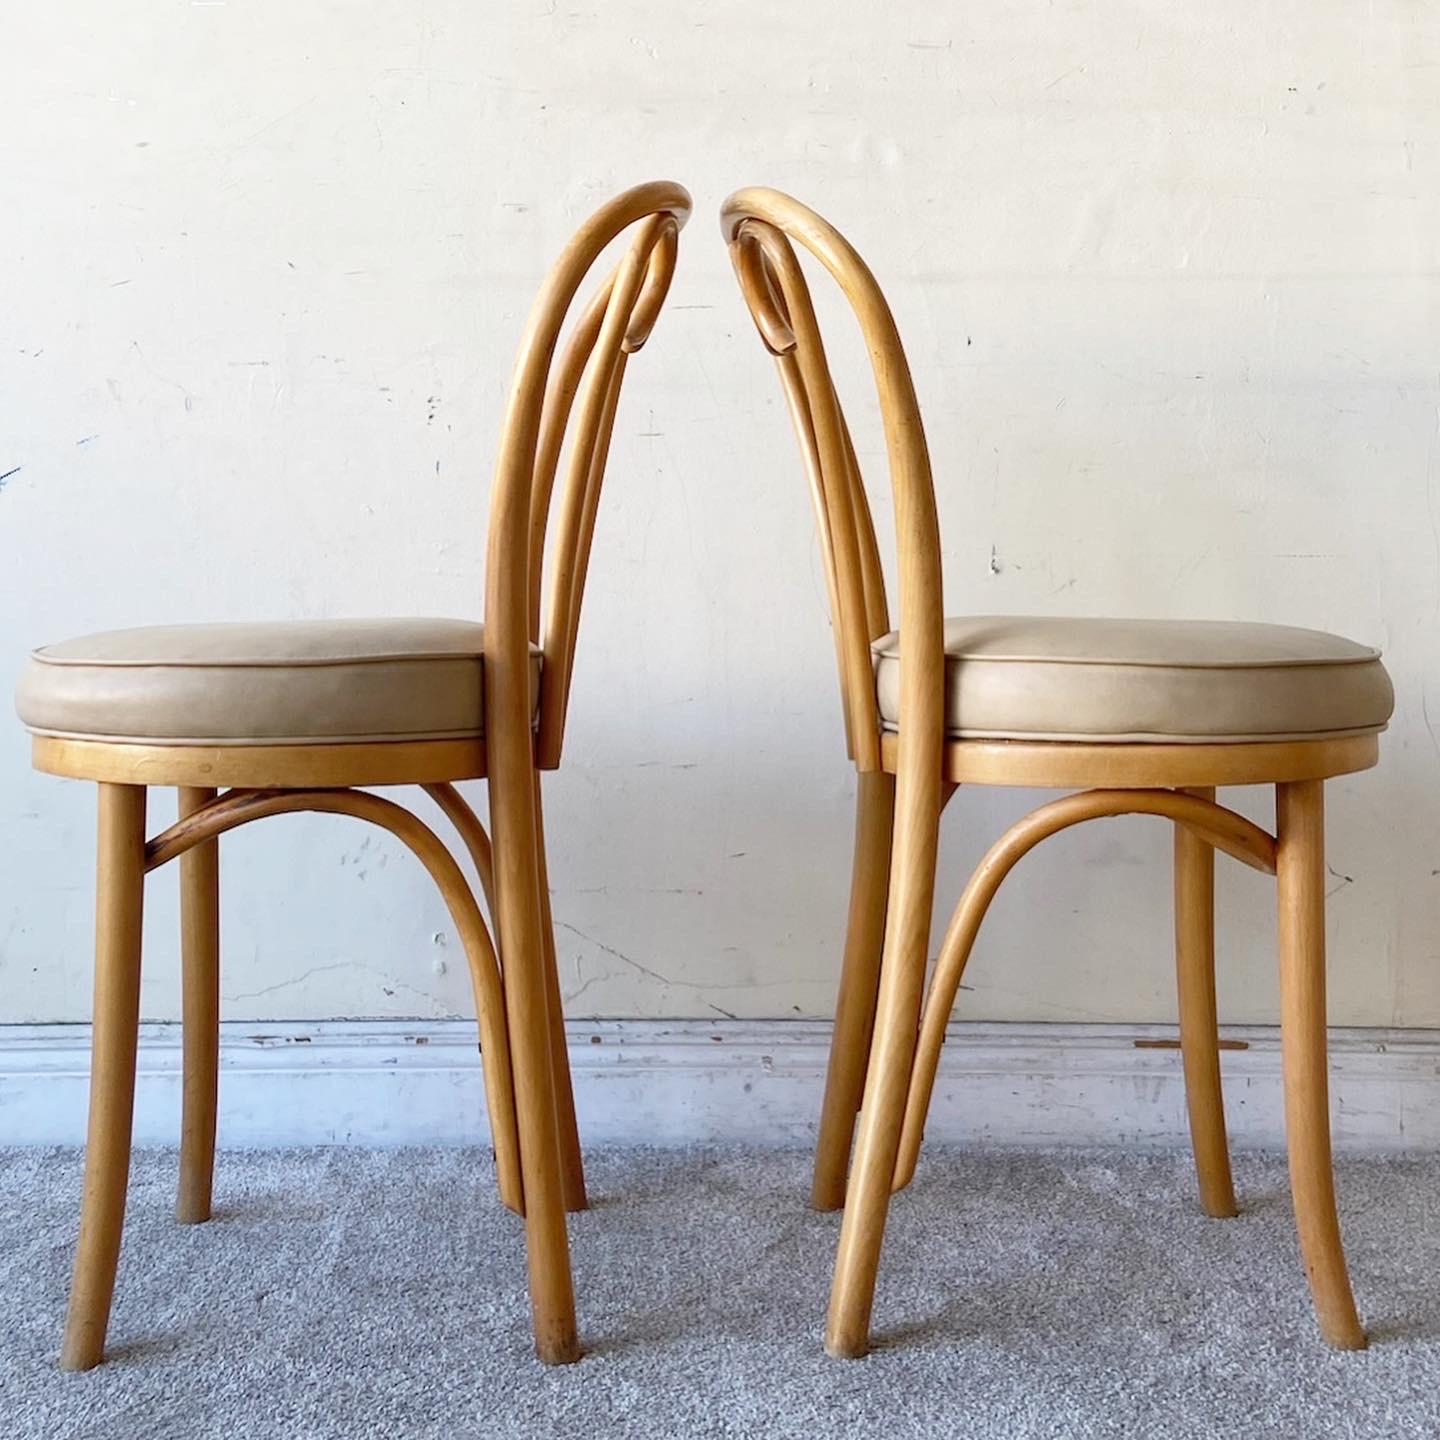 Polish Vintage Boho Chic Bentwood Cafe Bistro Dining Chairs, Set of 4 For Sale